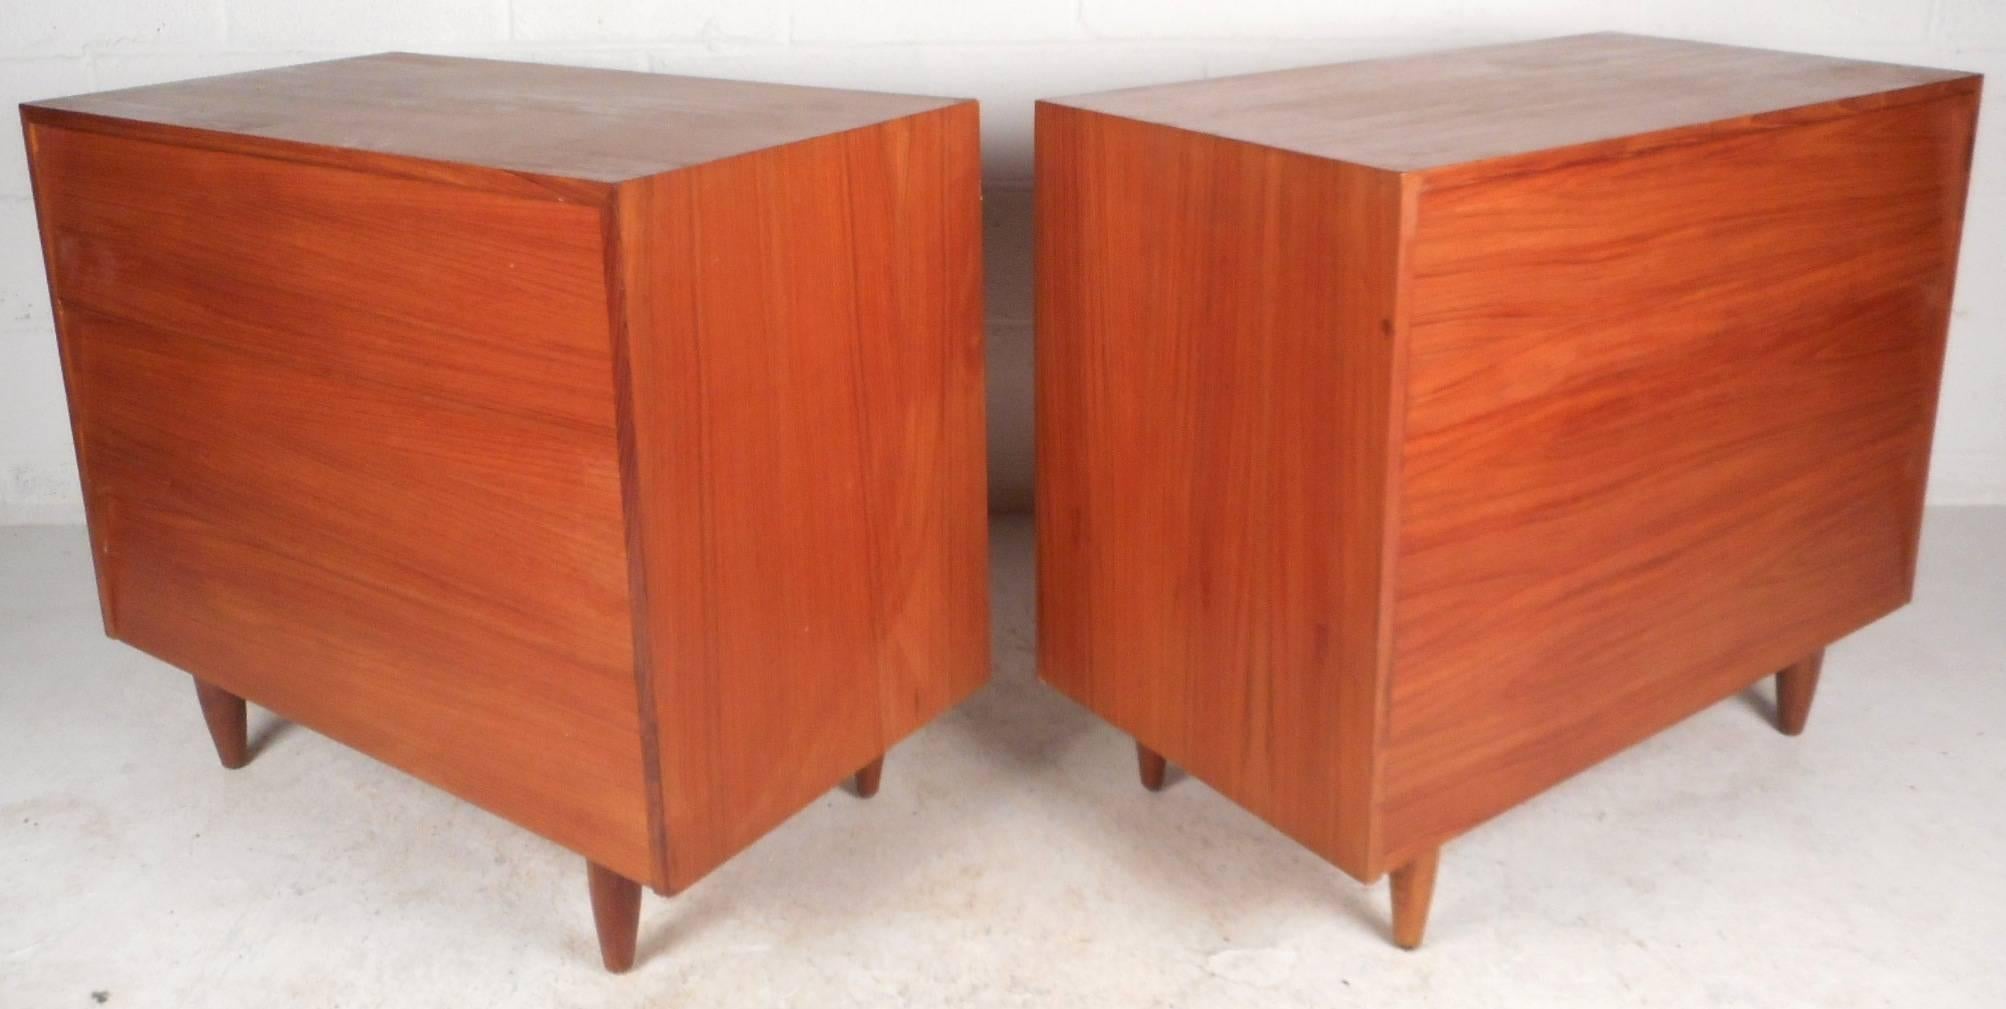 This beautiful vintage modern pair of gentleman's chests feature three hefty drawers with dove tail joints for storage. Elegant teak finish and stylish tapered legs add to the allure. Quality craftsmanship with a straight line design make this